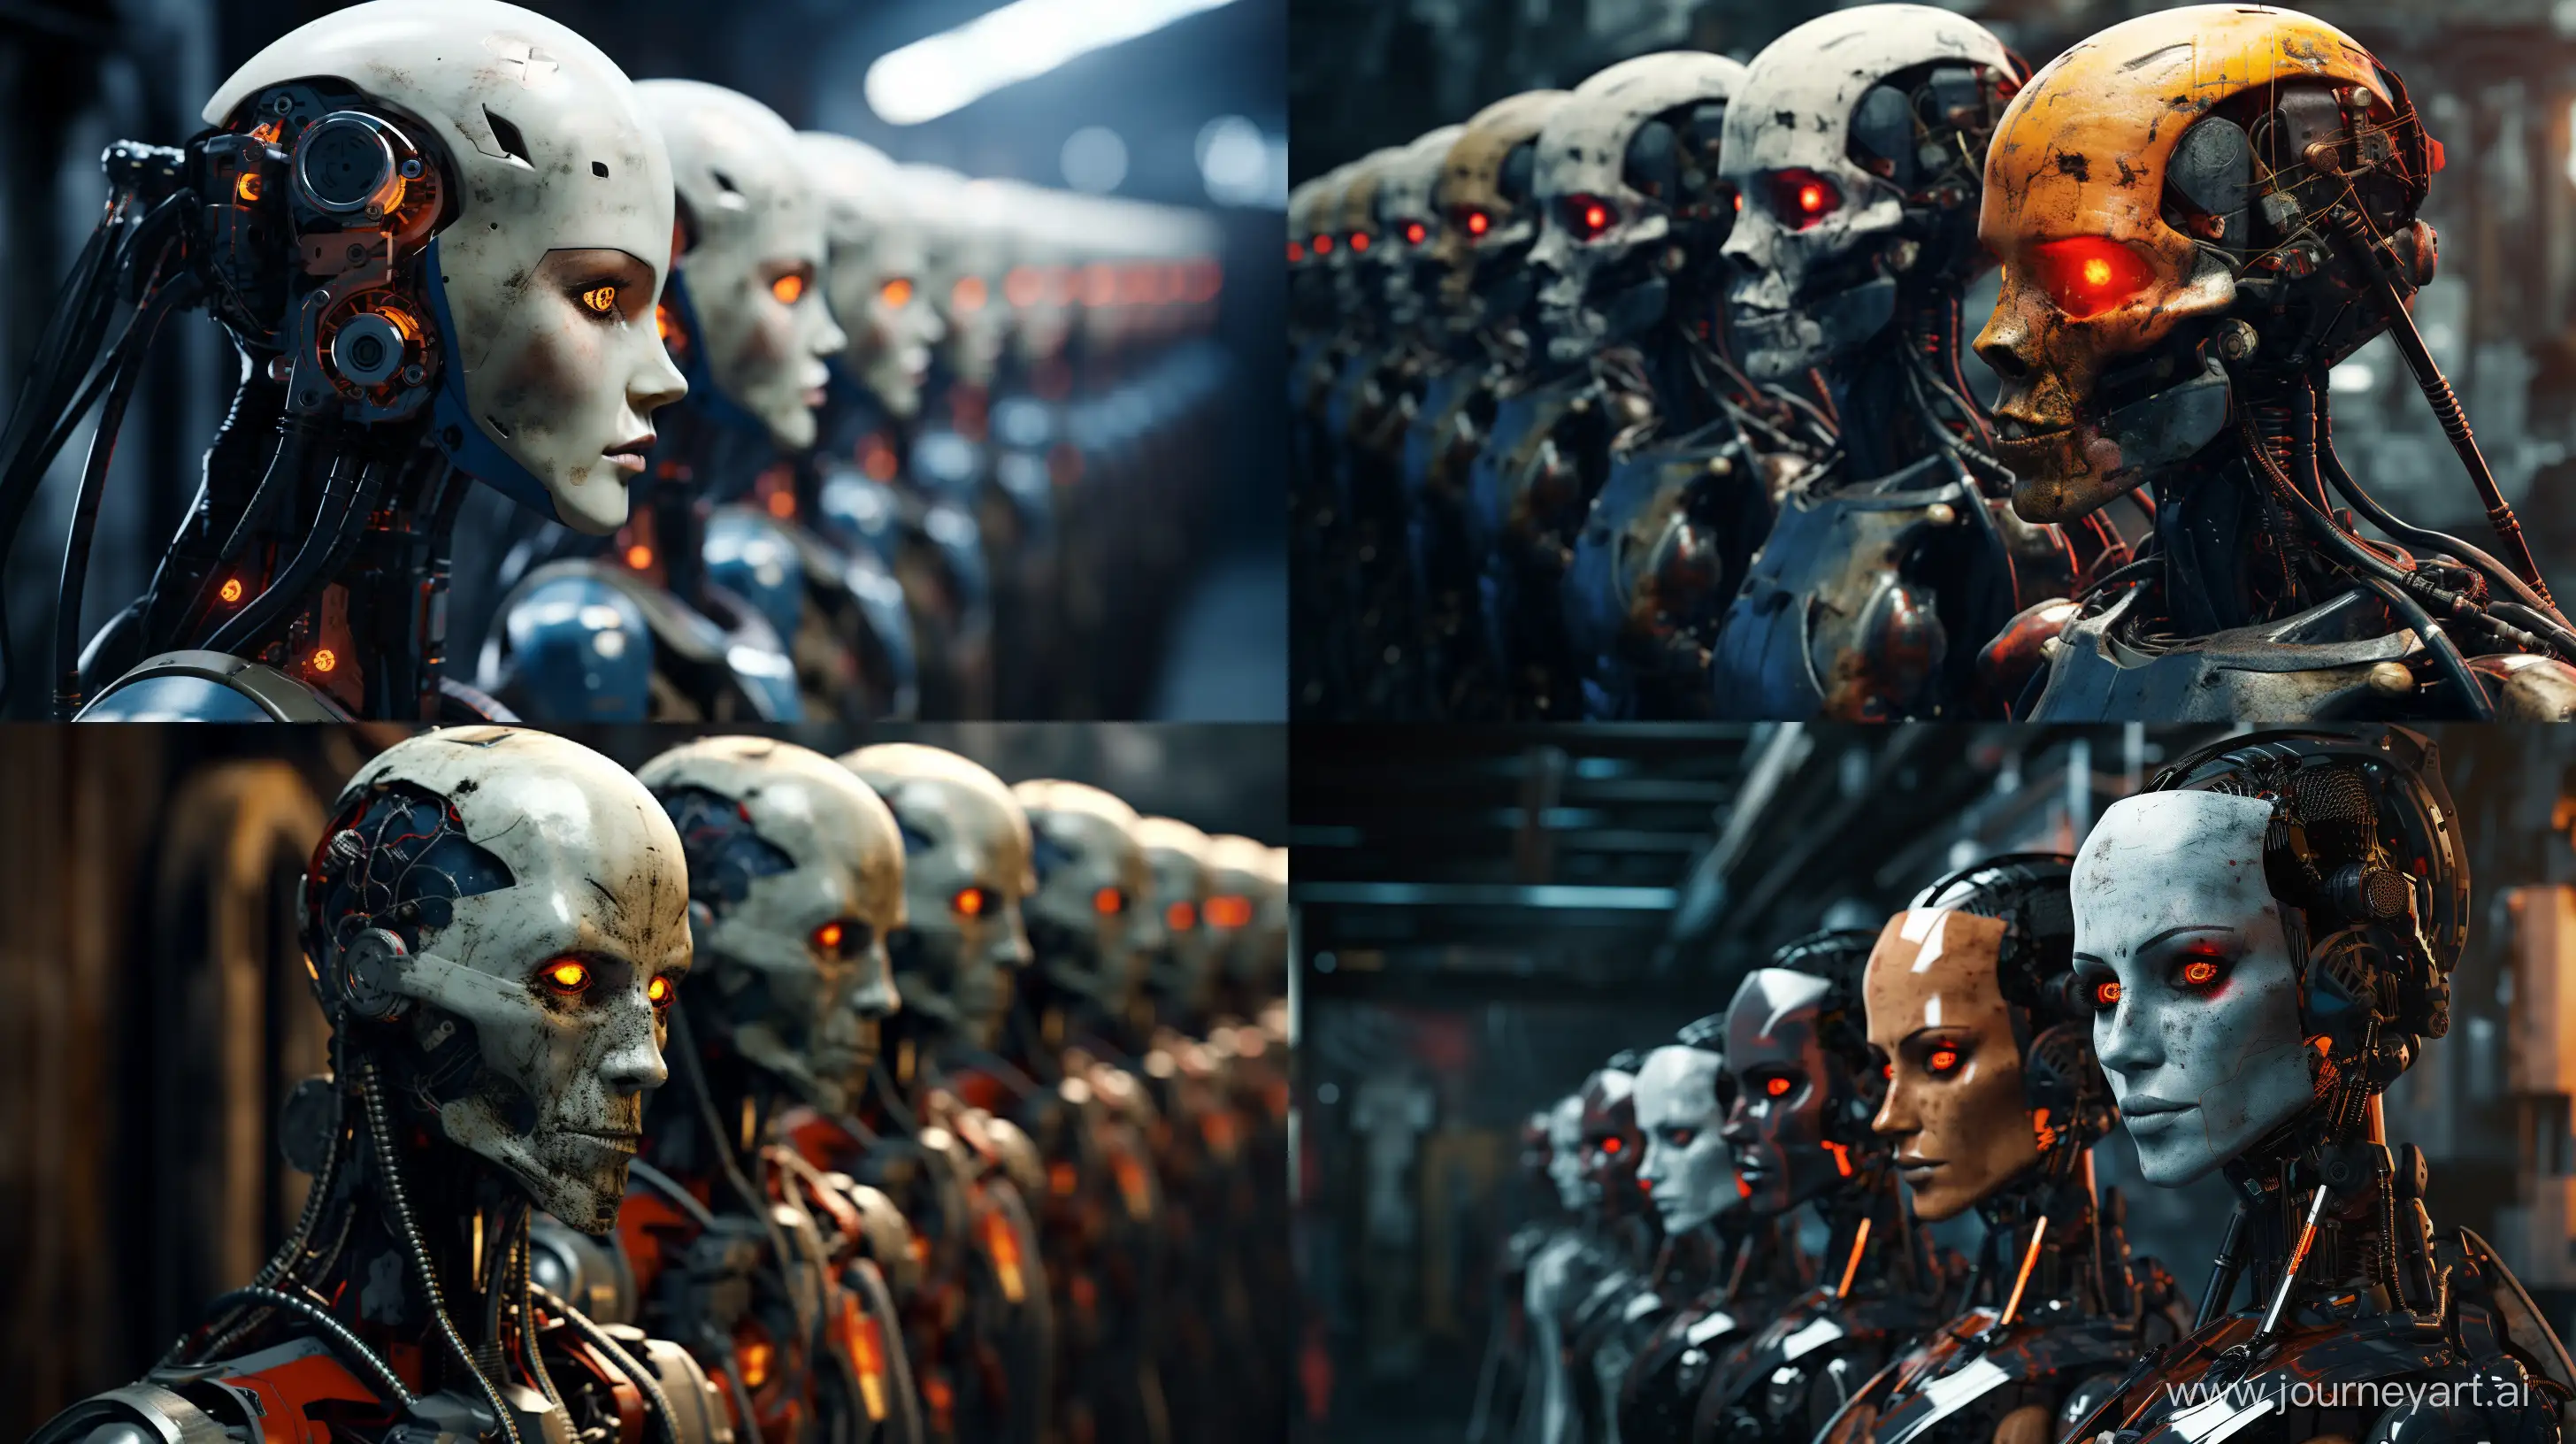 a line of humanoid robots in a state of disrepair or abandonment. They have a futuristic design with sleek surfaces and intricate mechanical details. The robots are colored differently, with the one in the foreground being orange and black, while those behind it are blue and red. They have dark visors instead of eyes, contributing to their enigmatic look. The setting is an outdoor, desolate environment, possibly after recent rain, as indicated by the moisture on the robots. The atmosphere is eerie, enhanced by the bare tree branches in the background. The robots show signs of wear, like scuffs and dirt, suggesting they’ve been exposed to the elements for some time. --ar 16:9